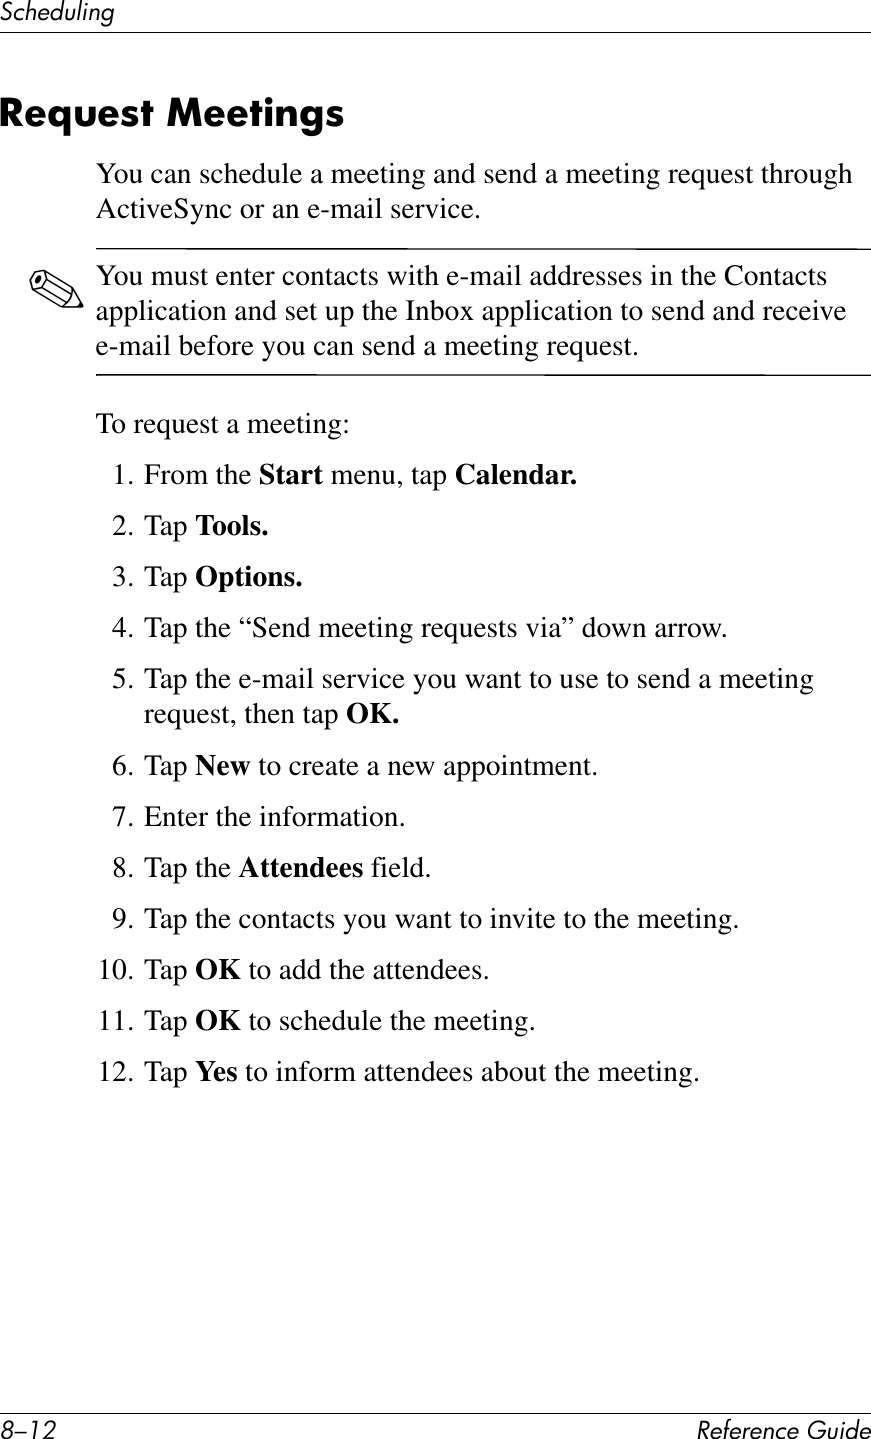 G/.0 !&quot;#&quot;$&quot;%&amp;&quot;&apos;()*+&quot;3&amp;Q&quot;+)K*%2-&quot;=(&quot;87&amp;Y&quot;&quot;7)$&apos;8You can schedule a meeting and send a meeting request through ActiveSync or an e-mail service.✎You must enter contacts with e-mail addresses in the Contacts application and set up the Inbox application to send and receive e-mail before you can send a meeting request.To request a meeting:1. From the Start menu, tap Calendar.2. Tap Tools.3. Tap Options.4. Tap the “Send meeting requests via” down arrow.5. Tap the e-mail service you want to use to send a meeting request, then tap OK. 6. Tap New to create a new appointment.7. Enter the information.8. Tap the Attendees field.9. Tap the contacts you want to invite to the meeting.10. Tap OK to add the attendees.11. Tap OK to schedule the meeting.12. Tap Yes to inform attendees about the meeting.